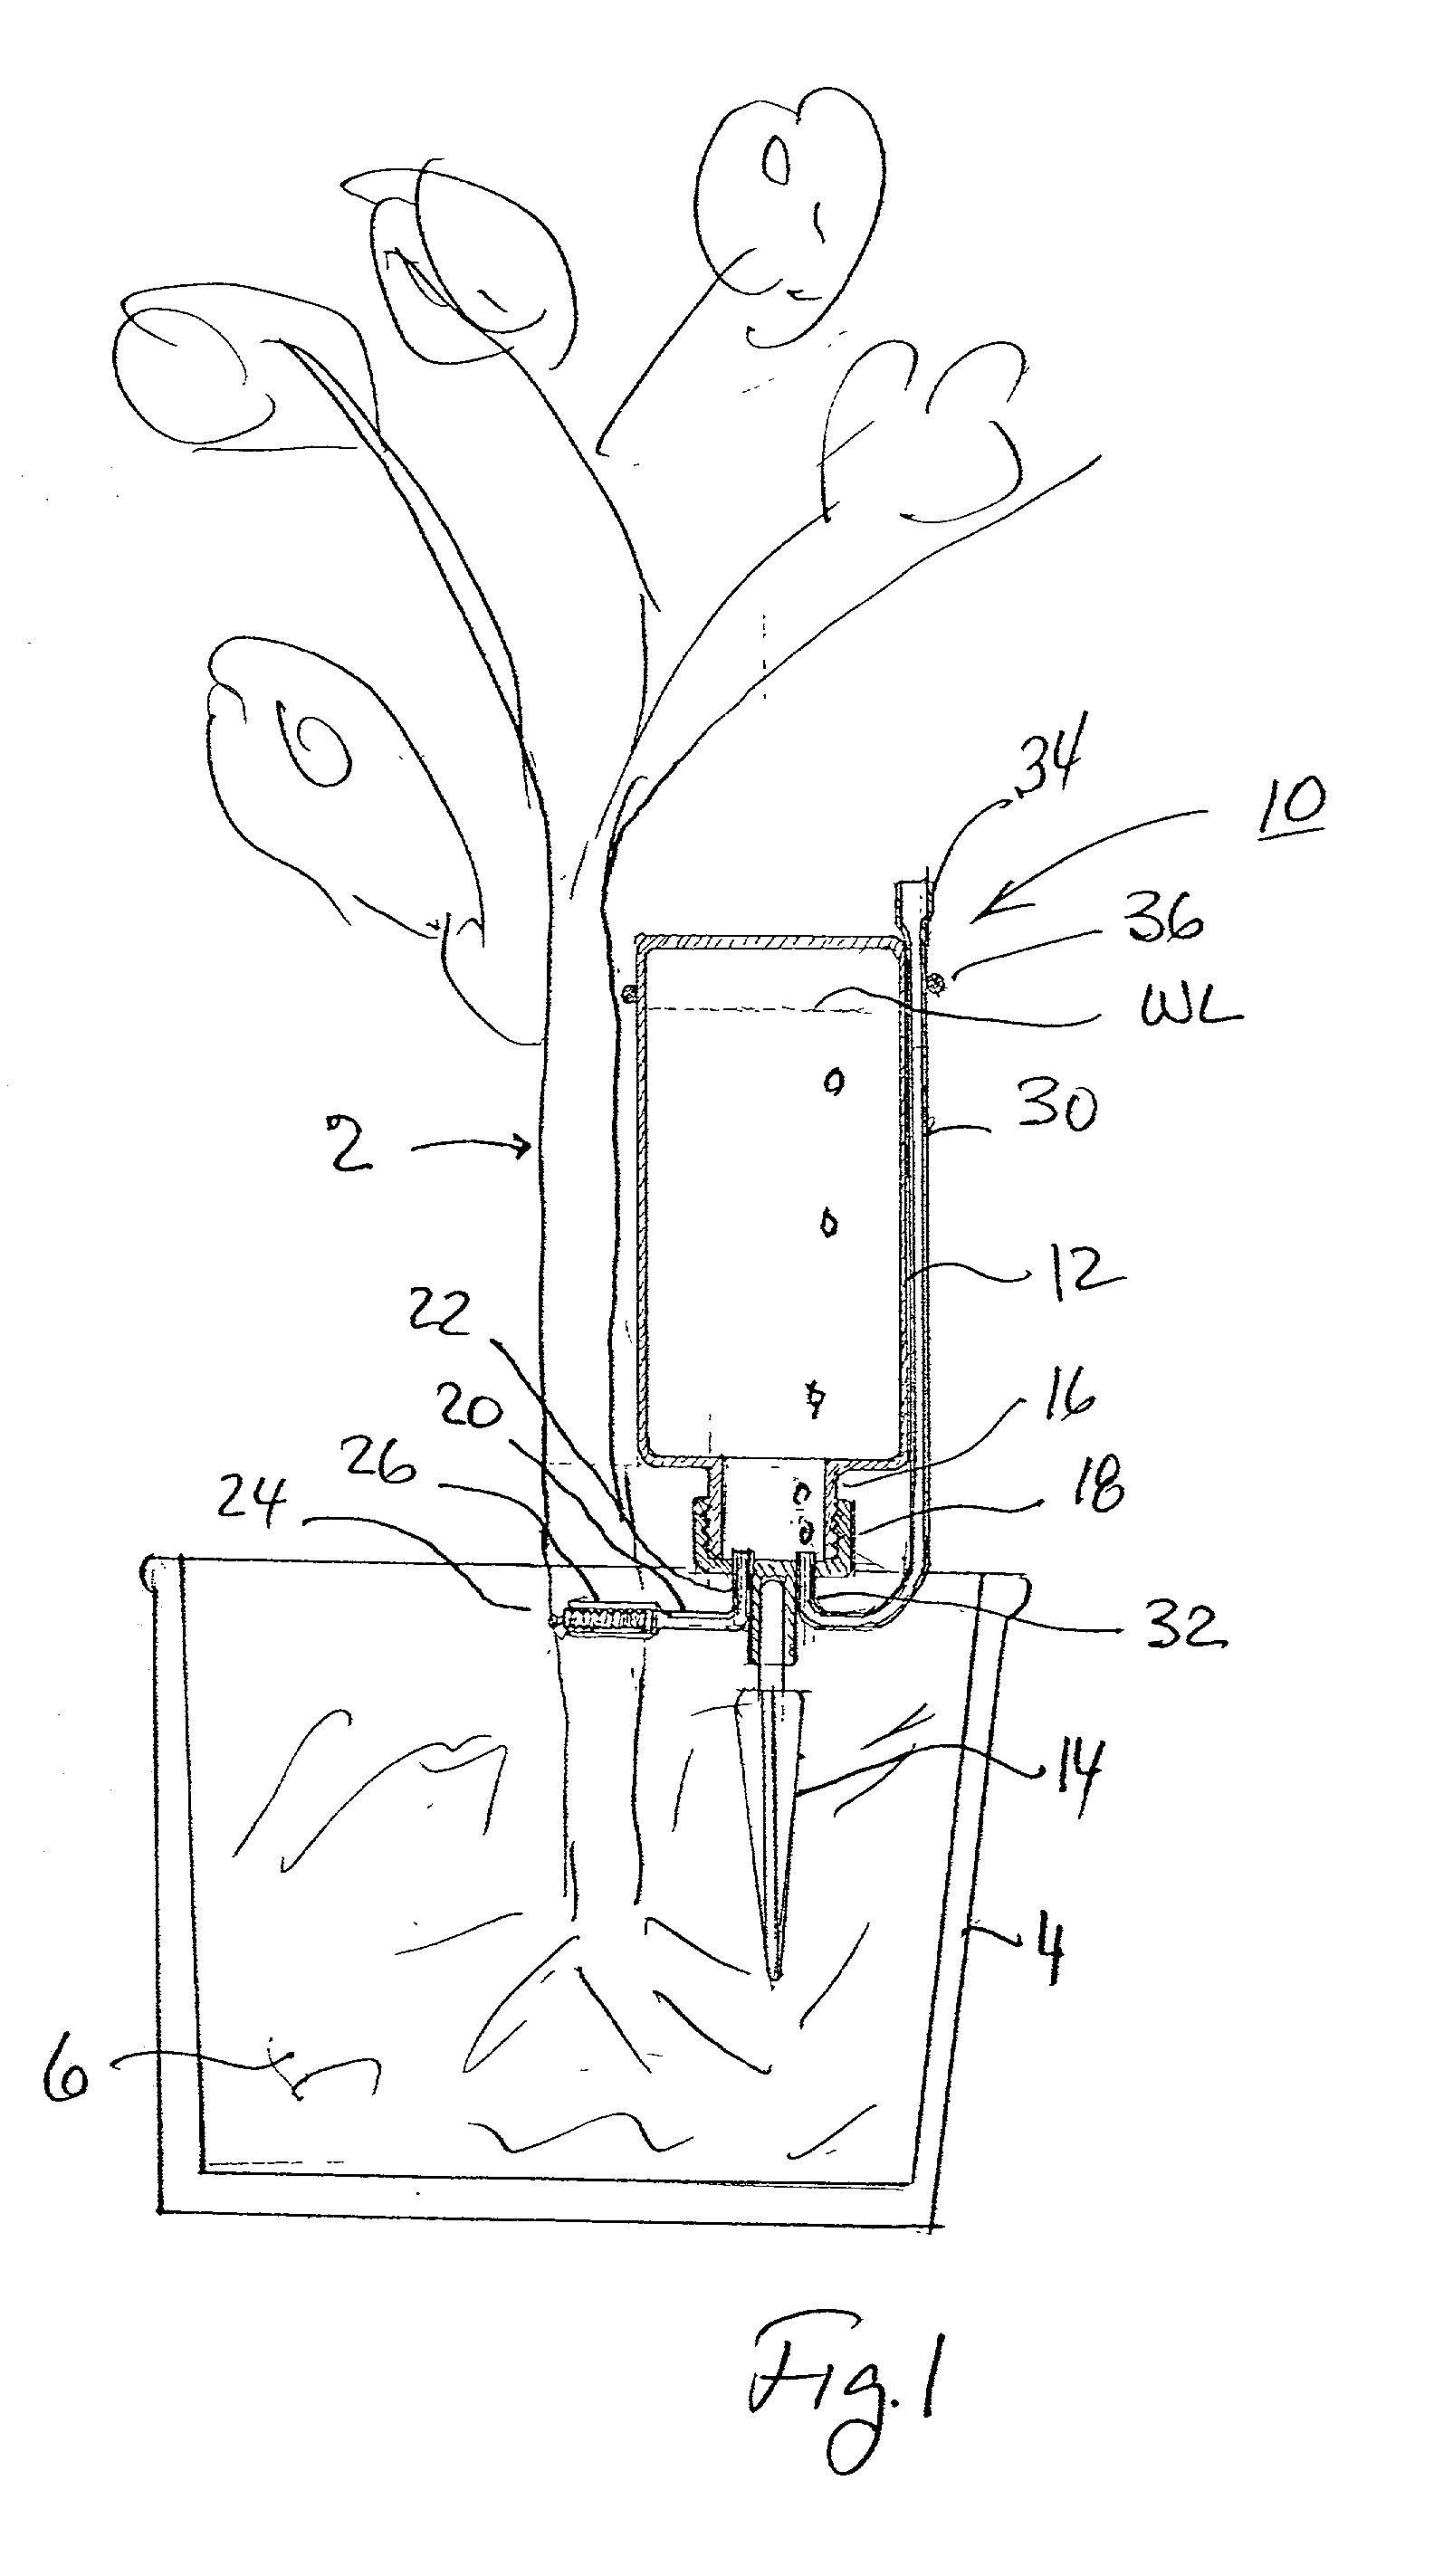 Liquid dispensing devices particularly useful for irrigating plants